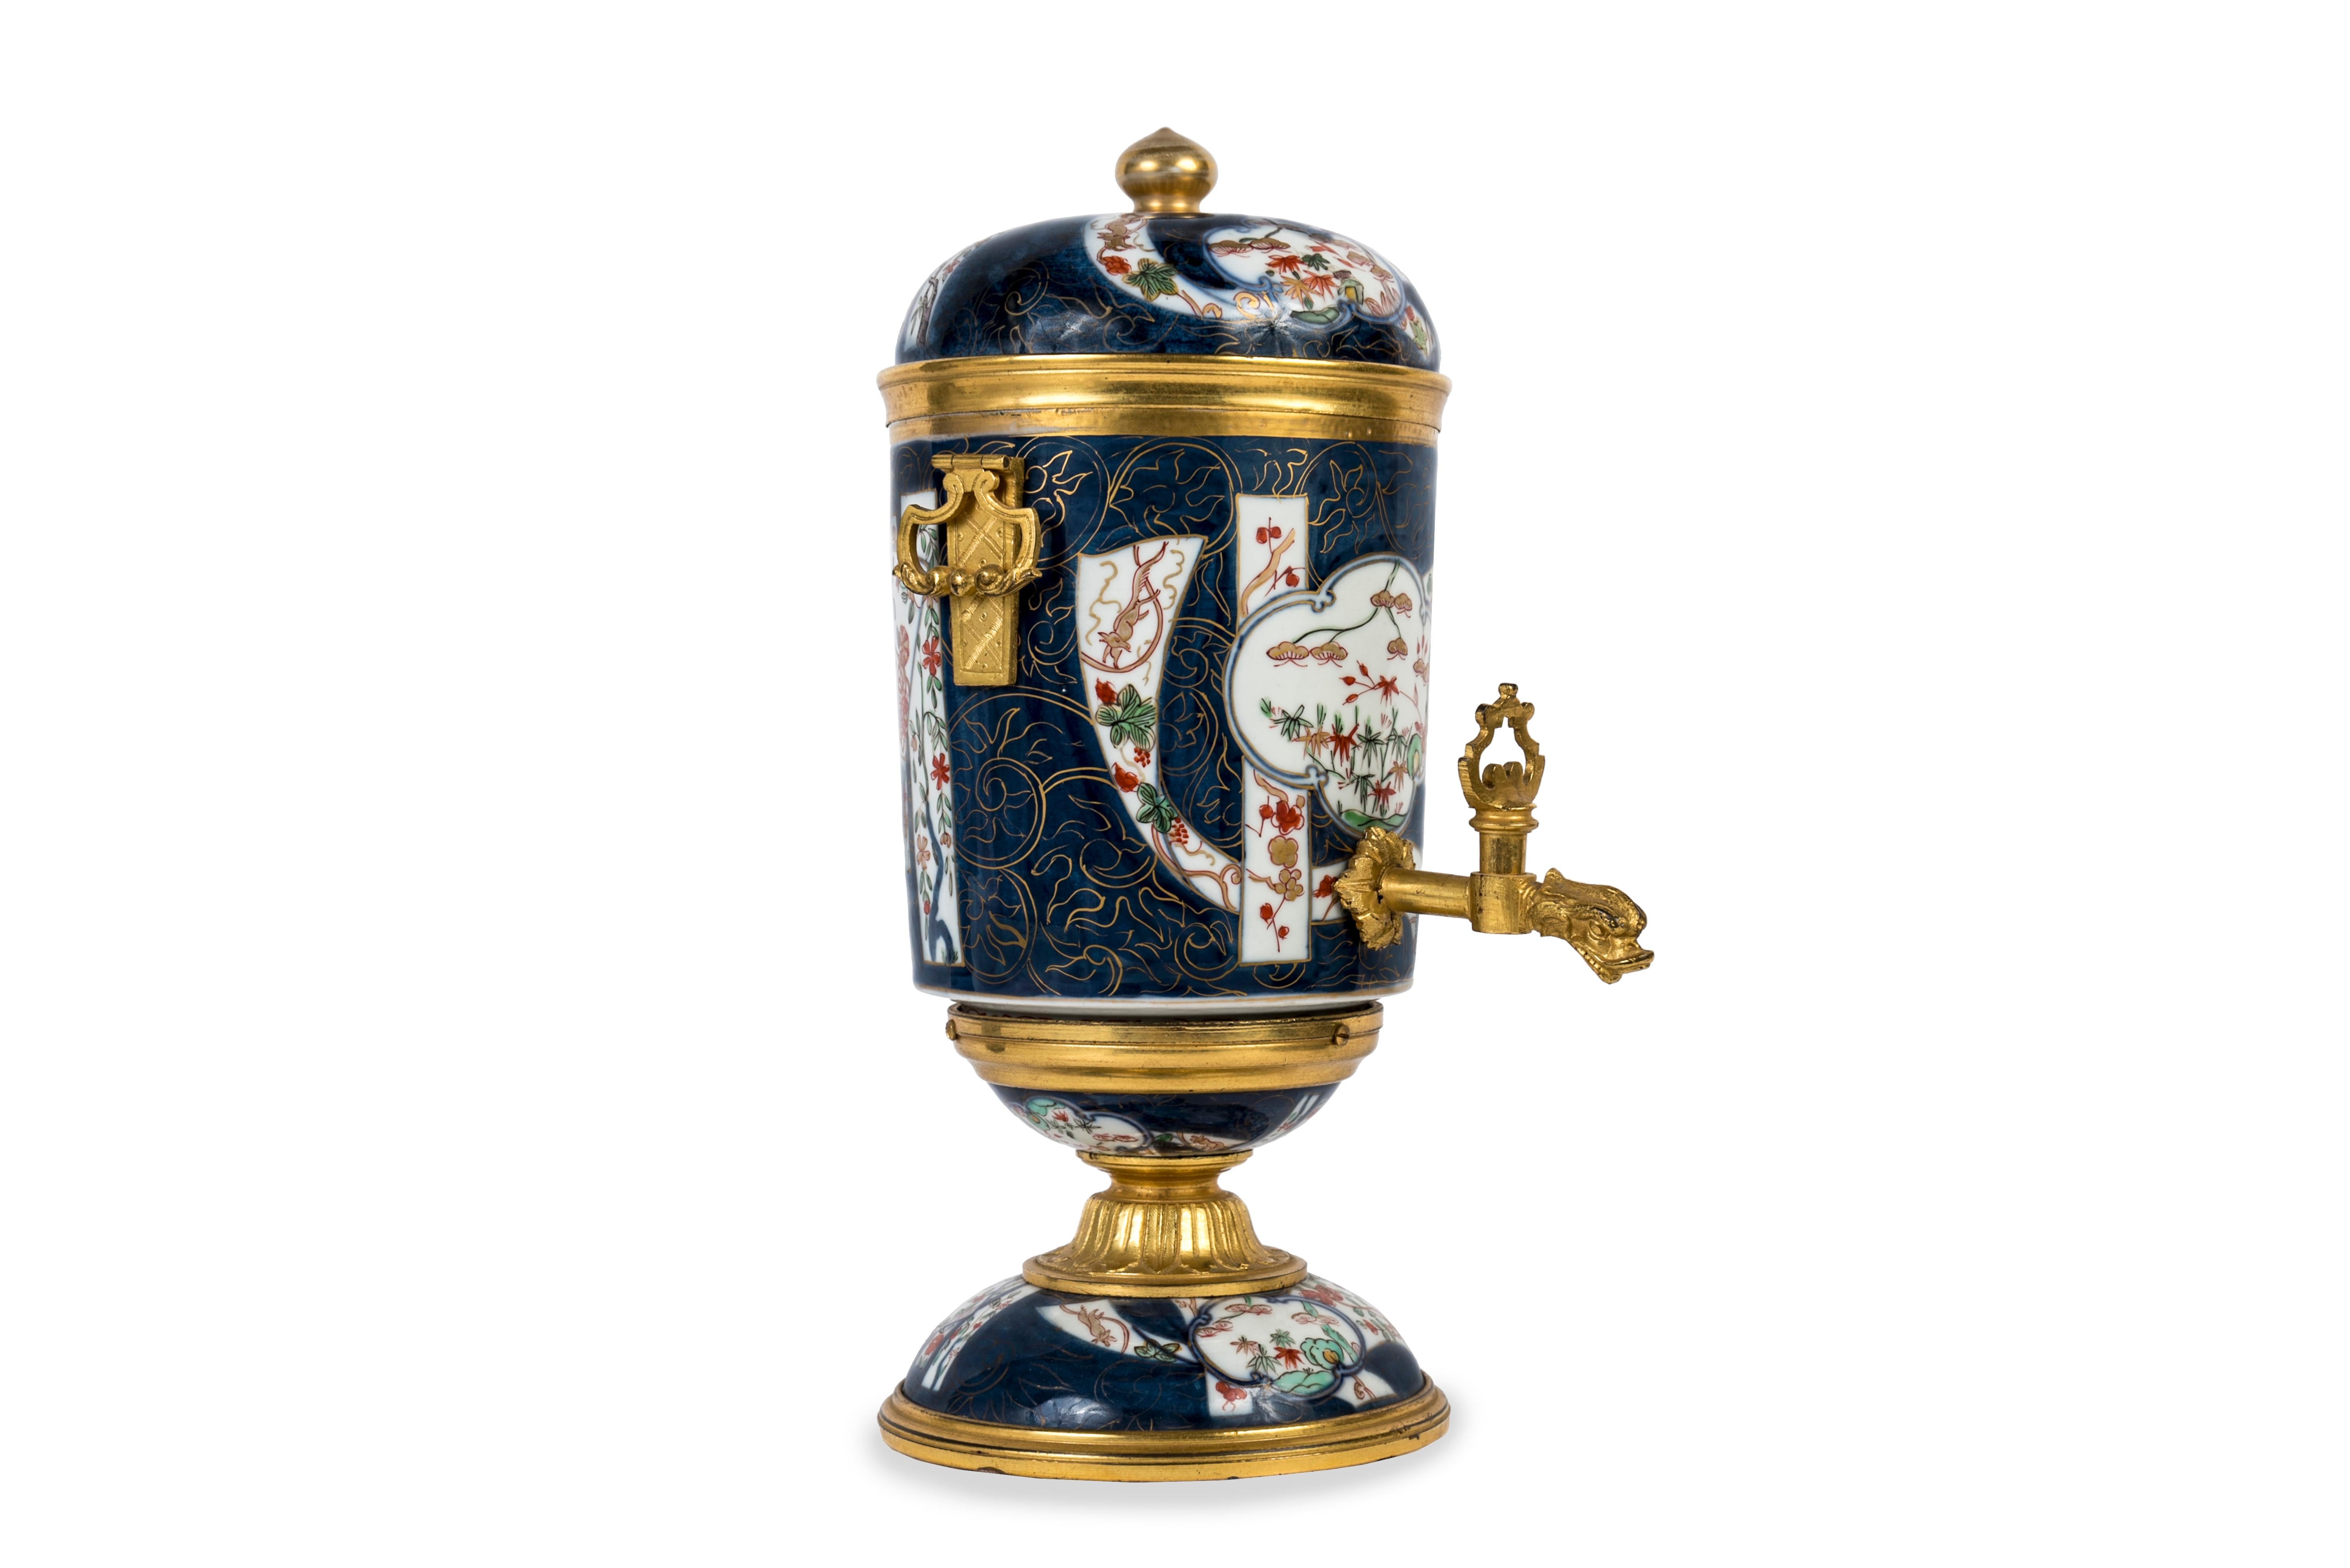 Perfume fountain in porcelain Imari kinrandé mounted in gilt bronze from the same set of porcelain. The cup and the bowl form the base, the pot covers the perfume container. 
Blue under-cover decoration with gold highlights of interlacing lotus